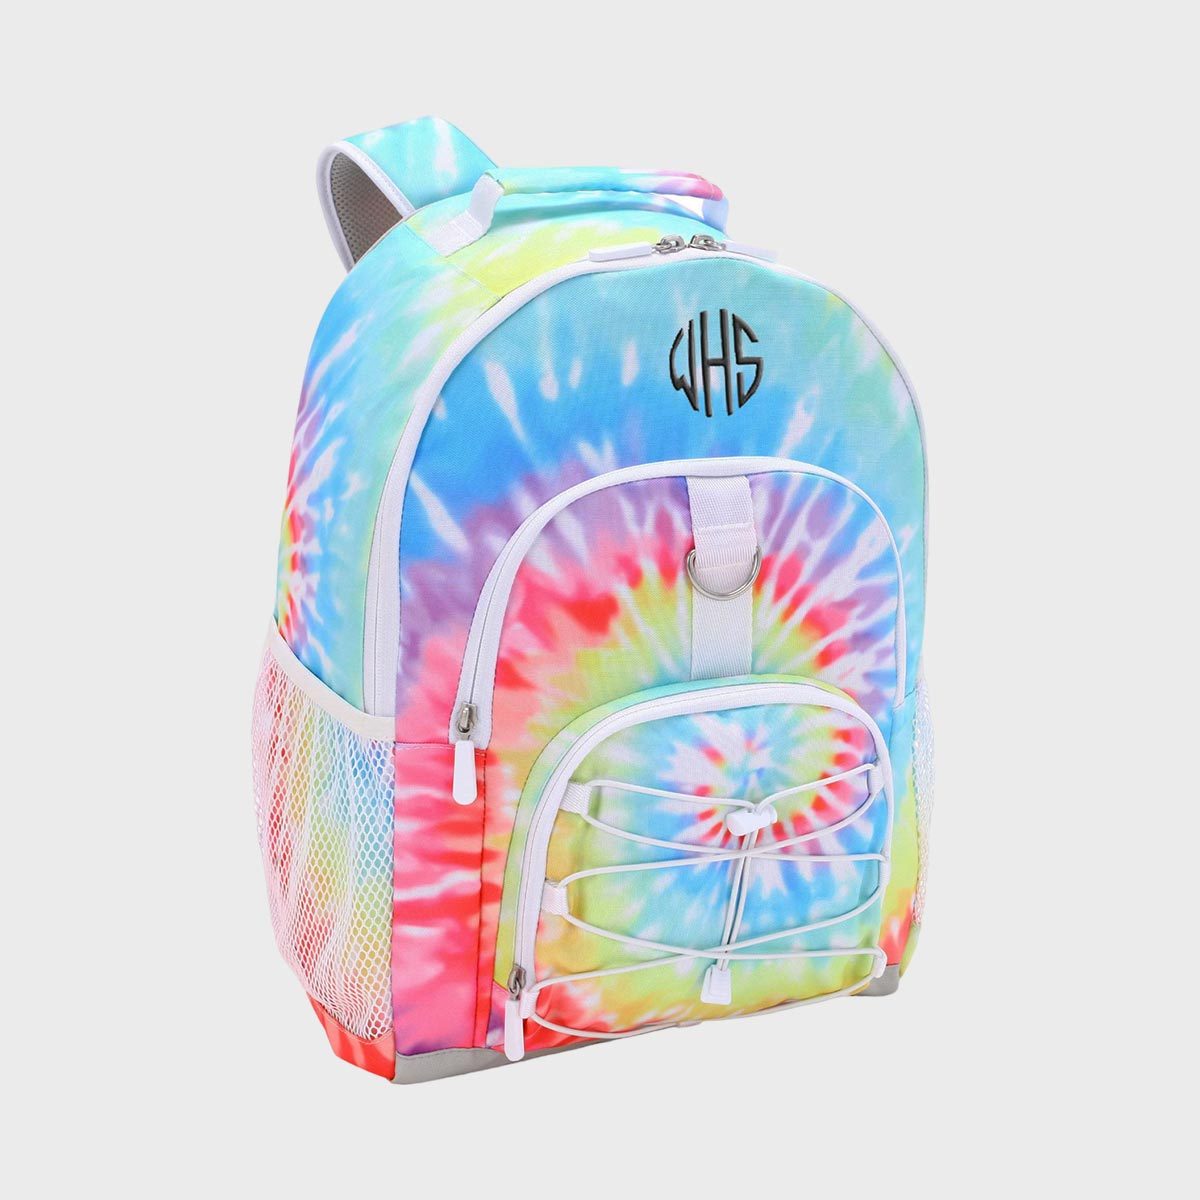 <h3>Pottery Barn Teen Gear-Up Rainbow Backpack</h3> <p><a href="https://www.rd.com/article/signs-backpack-is-too-heavy/" rel="noopener noreferrer">Kids' backpacks get heavy</a>—fast. But there's a smart solution to counter this problem. "Look for a very padded vented back, padded straps and a sternum strap for support," advises Renee Silverman, president of Irv's Luggage. This <a href="https://www.pbteen.com/products/gear-up-rainbow-tie-dye-recycled-backpack/" rel="noopener">stylish number</a> does the trick. Available in dozens of <a href="https://www.pbteen.com/search/results.html?words=Gear-Up++Backpack" rel="noopener noreferrer">funky prints</a> and five sizes (including a roller version), it has four roomy exterior compartments, a front zipper pocket with a cell phone holder, two D-rings in the front and back and a cinch mesh pocket on each side.</p> <p>Even better? You'll feel extra good about this kids' travel backpack knowing it's eco-friendly: The rugged, water-resistant recycled polyester is made from more than 12 <a href="https://www.rd.com/list/products-made-from-recycled-ocean-plastics/">recycled plastic</a> bottles. In fact, the brand has kept 66 million plastic bottles out of landfills to date, thanks to their recycled designs.</p> <p><strong>Pros</strong></p> <ul> <li>Variety of fun prints that appeal to kids</li> <li>Five size options</li> <li>Easy-to-clean, water-resistant material</li> <li>Made of recycled material</li> <li>Customization available</li> </ul> <p><strong>Cons</strong></p> <ul> <li>Personalized items not eligible for returns</li> </ul> <p class="listicle-page__cta-button-shop"><a class="shop-btn" href="https://www.pbteen.com/products/gear-up-rainbow-tie-dye-recycled-backpack/">Shop Now</a></p> <h2 class="">What to consider when buying a travel backpack</h2> <p>Backpacks come in all shapes and sizes. There are duffle backpacks, rolling backpacks, mini backpacks, laptop backpacks and more. The style you should choose largely depends on the activity and the duration of the trip.</p> <p>"You want something that looks fantastic in any scenario, from the airport to exploring a new city, but also has all the function to hold your stuff and keep you organized," says Adeela Hussain Johnson, president of Béis. If the backpack is essentially replacing a roller, then look for an option a bit bigger that has built-in packing functionality to fit <a href="https://www.rd.com/article/packing-list/" rel="noopener noreferrer">everything you need to travel</a>, like clothes, <a href="https://www.rd.com/list/travel-accessories-for-emergencies/" rel="noopener noreferrer">travel accessories</a>, makeup and a laptop, says Johnson. But you also want a design with smart organization and dedicated compartments to make <a href="https://www.rd.com/list/best-way-pack-suitcase/" rel="noopener noreferrer">packing easier</a> and keep small items, like <a href="https://www.rd.com/list/best-travel-jewelry-case/" rel="noopener noreferrer">jewelry</a> and power cords, safe and secure.</p> <p>If you're looking for stylish travel backpacks that work as a personal item for a flight, or need something more for everyday use, then go for a smaller versatile bag, suggests Johnson. (She loves expandable options, like <a href="https://beistravel.com/products/the-expandable-backpack-in-beige" rel="noopener noreferrer">this one from Béis</a>.) "What if you decide to go shopping or go crazy in duty-free before the flight—easily expand it by unzipping it and then collapse it again when you don't need that space. It's all about options."</p> <p>For Luo, he says the best travel backpack should be hyper-lightweight with a dedicated luggage sleeve to fly through the airport with ease. "Pick padded straps that support the back for days when you've packed everything but the kitchen sink," he advises.</p> <p>If you plan to <a href="https://www.rd.com/article/checking-luggage-smart-tips/" rel="noopener noreferrer">check your luggage</a>, straps that tuck or hide away—so they don't get caught in conveyor belts or drag on the ground—will make the voyage run more smoothly. Lau shares another <a href="https://www.rd.com/list/frequent-travelers-airplane-hacks/" rel="noopener noreferrer">hack for flying</a>, "I like to have a TSA-approved laptop and tablet sleeve, so I don't have to completely remove my laptop from the bag."</p> <h2 class="">How we found the best travel backpacks</h2> <p>As shopping experts, our only job is to help you find a winning product. We start with the research and reporting basics—what products are made of, what they look like and how much they cost—to ensure that we're only recommending the buys that are worth your time and money. Then, we research the features that speak to the product's quality, taking advice from industry insiders and subject matter experts on what makes a product a smart value (or worthy of a splurge). Finally, we do the work of combing through user reviews to see how real people interact with the product, and if it stands up to the test.</p> <h2 class="">FAQ</h2> <h3>Is it better to travel with a backpack or suitcase?</h3> <p>The best travel backpack is a versatile <a href="https://www.rd.com/list/how-to-pack-with-only-carry-on-bags/" rel="noopener noreferrer">carry-on bag</a> that allows you to easily maneuver—hands-free—through busy airports and crowded towns. If you're backpacking or traveling by foot, portability is paramount, so backpacks are usually the best bet. But, if you're going on a longer trip and need to pack more items, a roller suitcase or <a href="https://www.rd.com/list/hard-shell-luggage/" rel="noopener noreferrer">hard shell luggage</a> might be a better option.</p> <h3>What size travel backpack do I need?</h3> <p>It depends on the length of the trip. Small knapsacks may be suitable for overnight getaways while you'll want a larger, more substantial size for weekend trips. For vacations longer than a week, check out the top <a href="https://www.rd.com/list/best-luggage-brands/" rel="noopener noreferrer">luggage brands</a> and <a href="https://www.rd.com/list/best-luggage-sets/" rel="noopener noreferrer">best luggage sets</a>. And if you're on a budget, scope out the <a href="https://www.rd.com/article/best-luggage-deals/" rel="noopener noreferrer">best luggage deals</a> for major discounts.</p> <h3>How much can fit in a carry-on backpack?</h3> <p>The best carry-on backpack should be able to hold at least a couple of days' worth of clothes, accessories, shoes and <a href="https://www.rd.com/article/bagsmart-toiletry-bag/" rel="noopener noreferrer">toiletries</a>. Using packing cubes and compression bags and <a href="https://www.rd.com/article/how-to-roll-clothes-for-packing/" rel="noopener noreferrer">rolling clothes</a> help maximize space in the backpack. But the exact amount of stuff that fits will vary depending on the style and design of the bag.</p> <p>Most airlines allow a carry-on with a maximum size of 22 inches by 14 inches by 9 inches and a weight of 22 pounds (although, many domestic airlines don't have weight restrictions). But remember, just because a backpack <em>can</em> carry a ton, doesn't mean it should, especially when it's a kid doing the carrying. To prevent <a href="https://www.rd.com/article/heavy-backpack-every-day/" rel="noopener noreferrer">injury and backaches</a>, the American Academy of Pediatrics (AAP) recommends that a child's backpack weigh no more than 10 to 15% of their body weight.</p> <h3>Are all carry-on backpacks airline-approved?</h3> <p>Do you plan to put the <a href="https://www.rd.com/article/why-more-airlines-are-starting-to-charge-for-carry-on-bags/" rel="noopener noreferrer">carry-on</a> backpack in the overhead bin of the plane or under the seat? Every airline has different <a href="https://www.rd.com/article/size-of-carry-on-luggage/" rel="noopener noreferrer">size restrictions</a> for each, so double-check with the carrier to avoid unwanted baggage fees.</p> <p><strong>Sources:</strong></p> <ul> <li class="">Aaron Luo, CEO of <a href="https://caraasport.com/" rel="noopener noreferrer">Caraa</a></li> <li class="">Kevin Lau, retail sales specialist at <a href="https://www.rei.com/" rel="noopener noreferrer">Rei</a></li> <li class="">Renee Silverman, president of <a href="https://www.irvsluggage.com/" rel="noopener noreferrer">Irv's Luggage</a></li> <li class="">Adeela Hussain Johnson, president of <a href="https://beistravel.com" rel="noopener noreferrer">Béis</a></li> </ul> <p><strong>Stop hunting for the best products and deals—get our expert scoop on secret sales and discounts, gift ideas for everyone and can't-miss products. Sign up for the <a href="https://www.rd.com/newsletter/" rel="noopener noreferrer">Stuff We Love newsletter</a>.</strong></p>